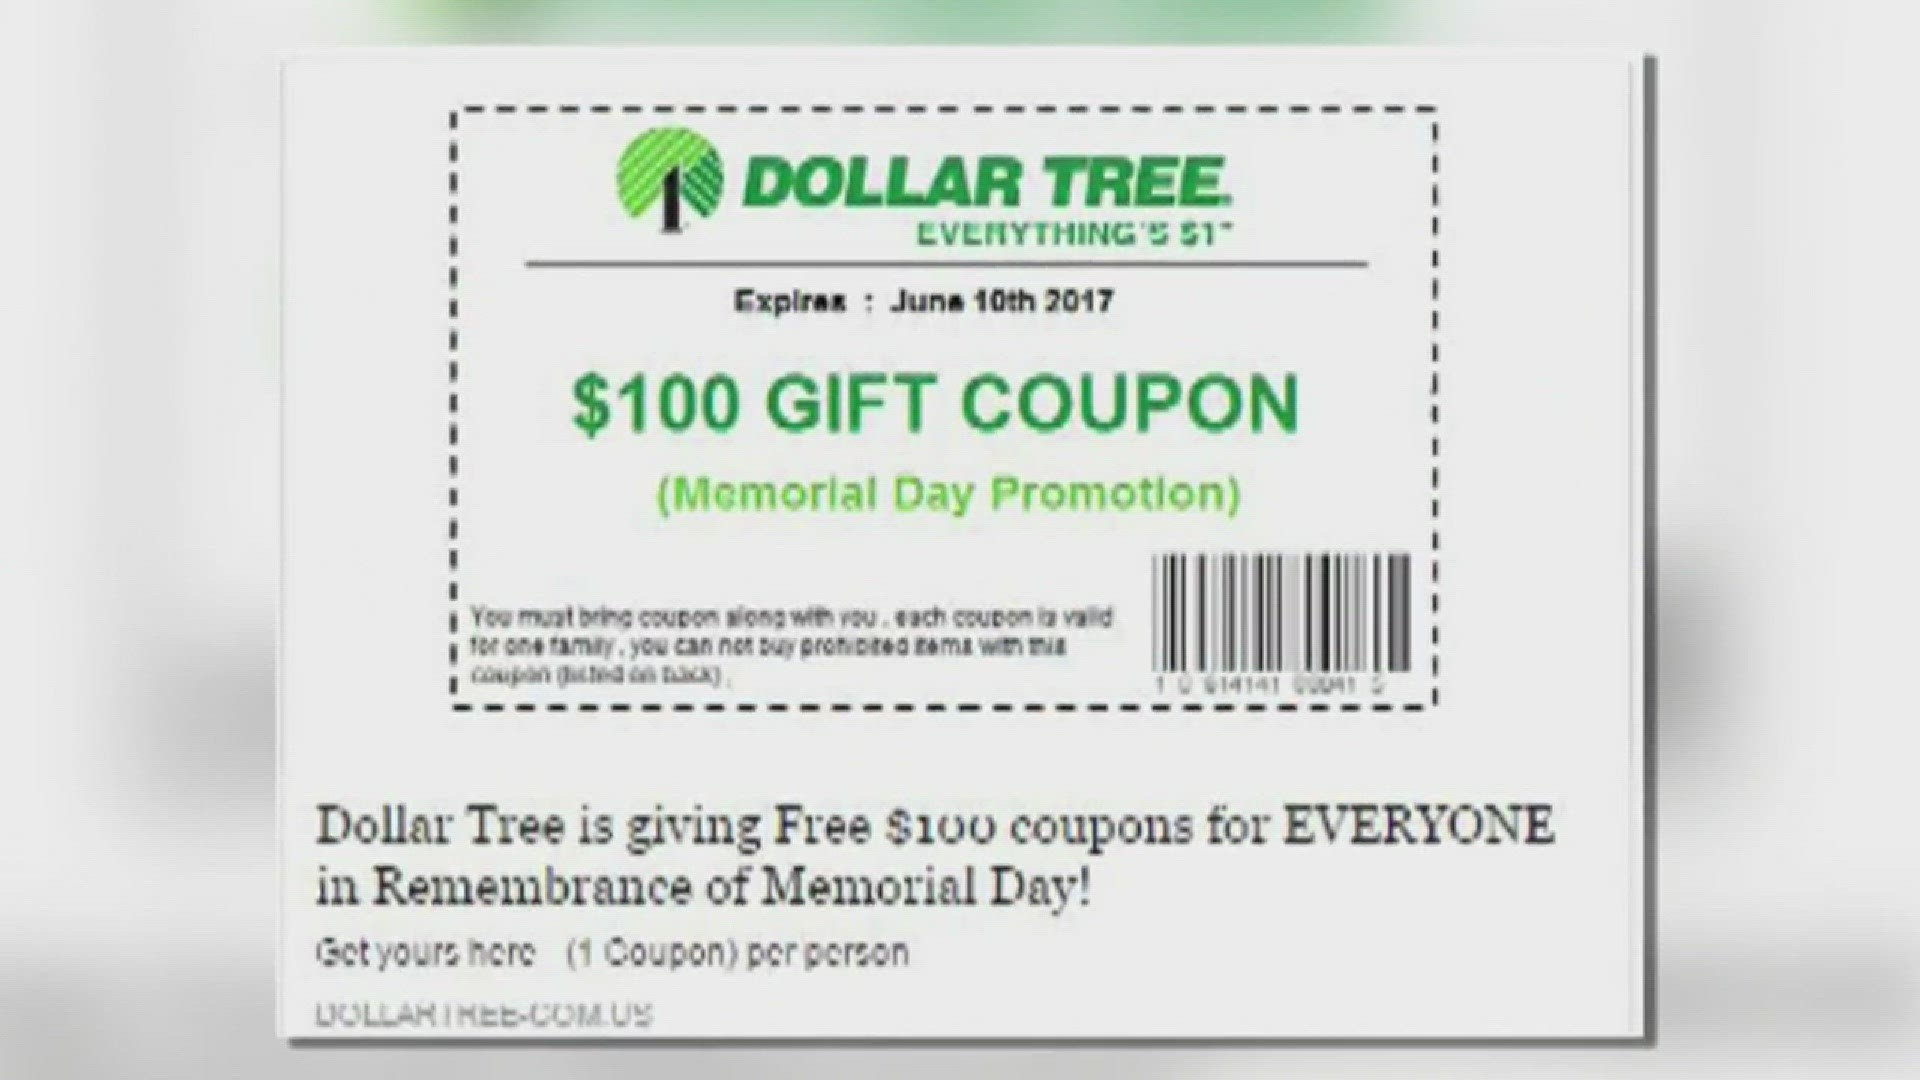 Have you seen this coupon? It claims Dollar Tree is giving away coupons for $100 as part of a Memorial Day promotion. It looks legitimate, but is it?